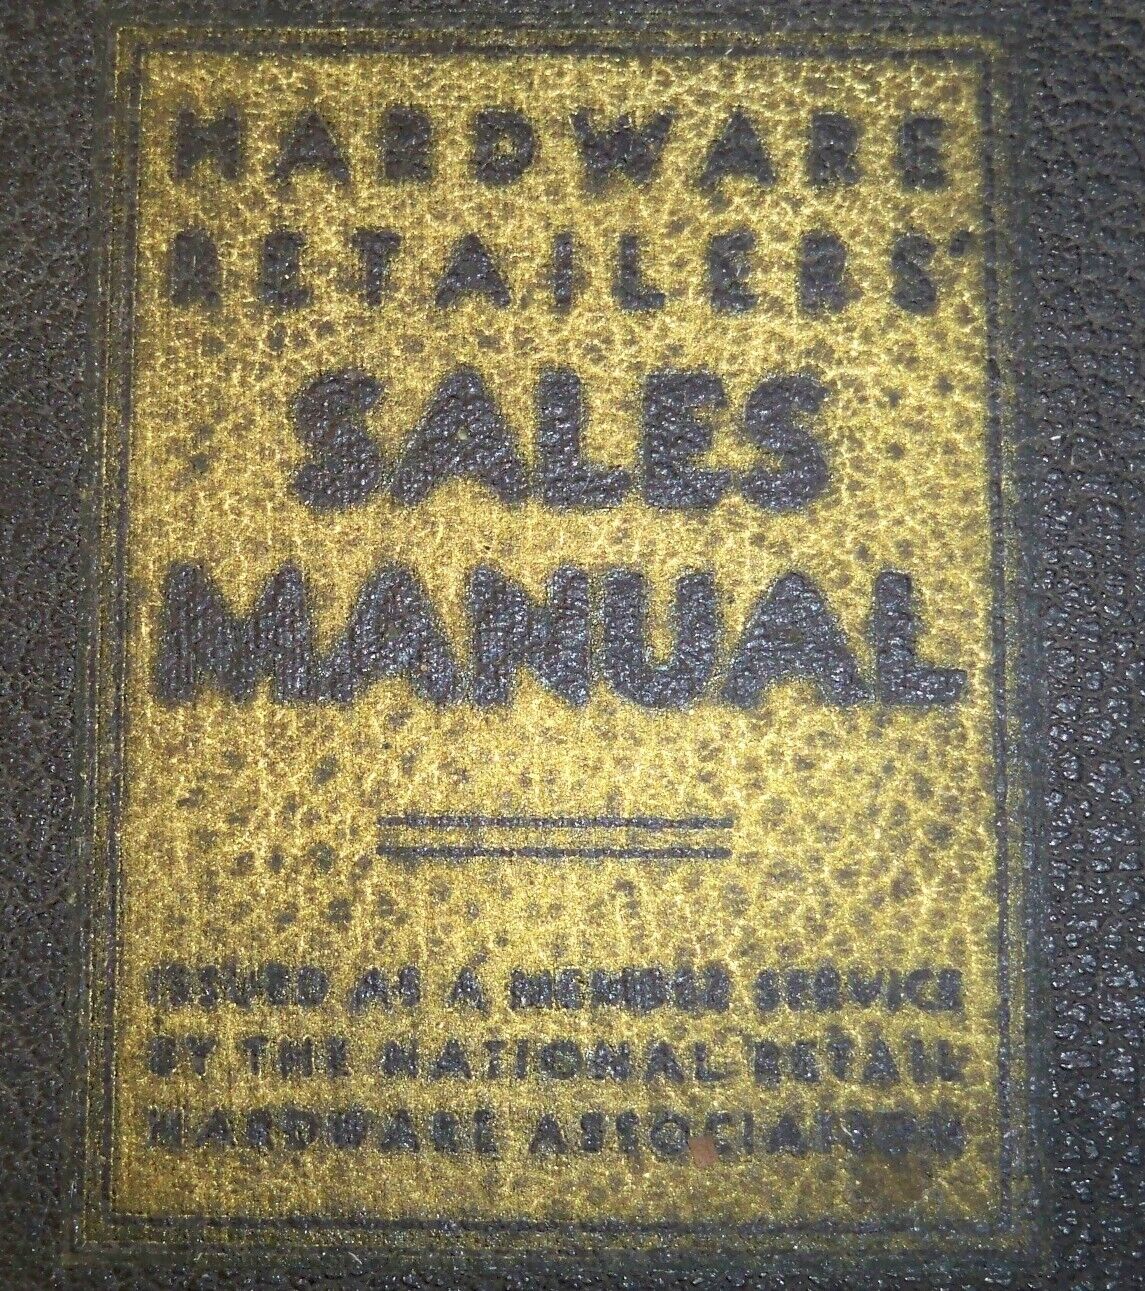 Antique 1930s ORIGINAL Hardware Retailers Sales Manual Catalog/How To Sell Guide